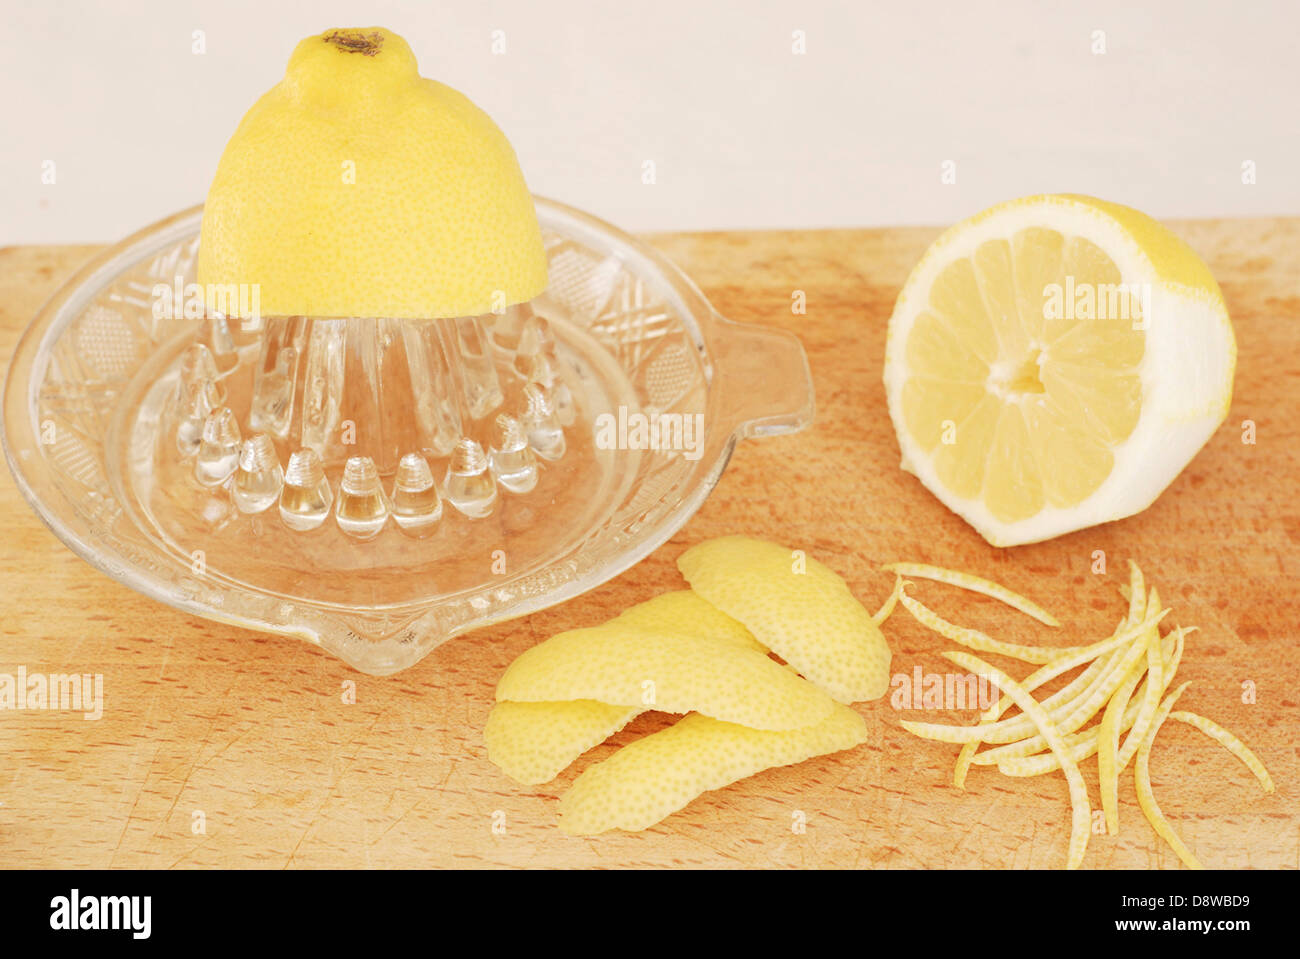 Squeezing a lemon and making zests and rinds Stock Photo